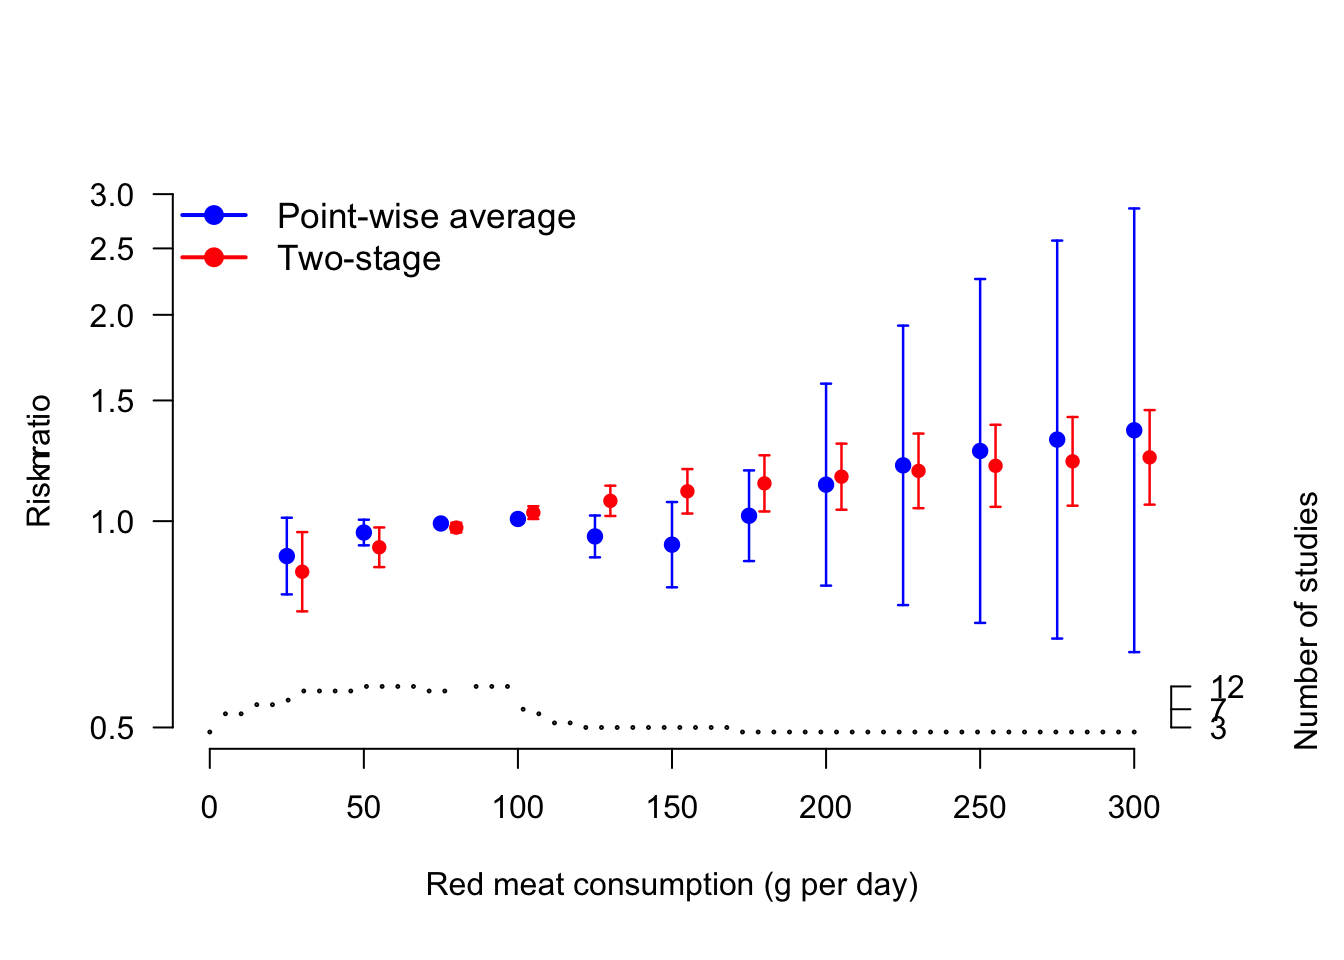 Comparison between pointwise and one-stage predicted relative risks for the association between red meat consumption (g per day) and bladder cancer risk. The step function at the bottom indicates the number of studies contributing to the prediction in the pointwise analysis. The relative risks are presented on the log scale using 85 g per day as referent.